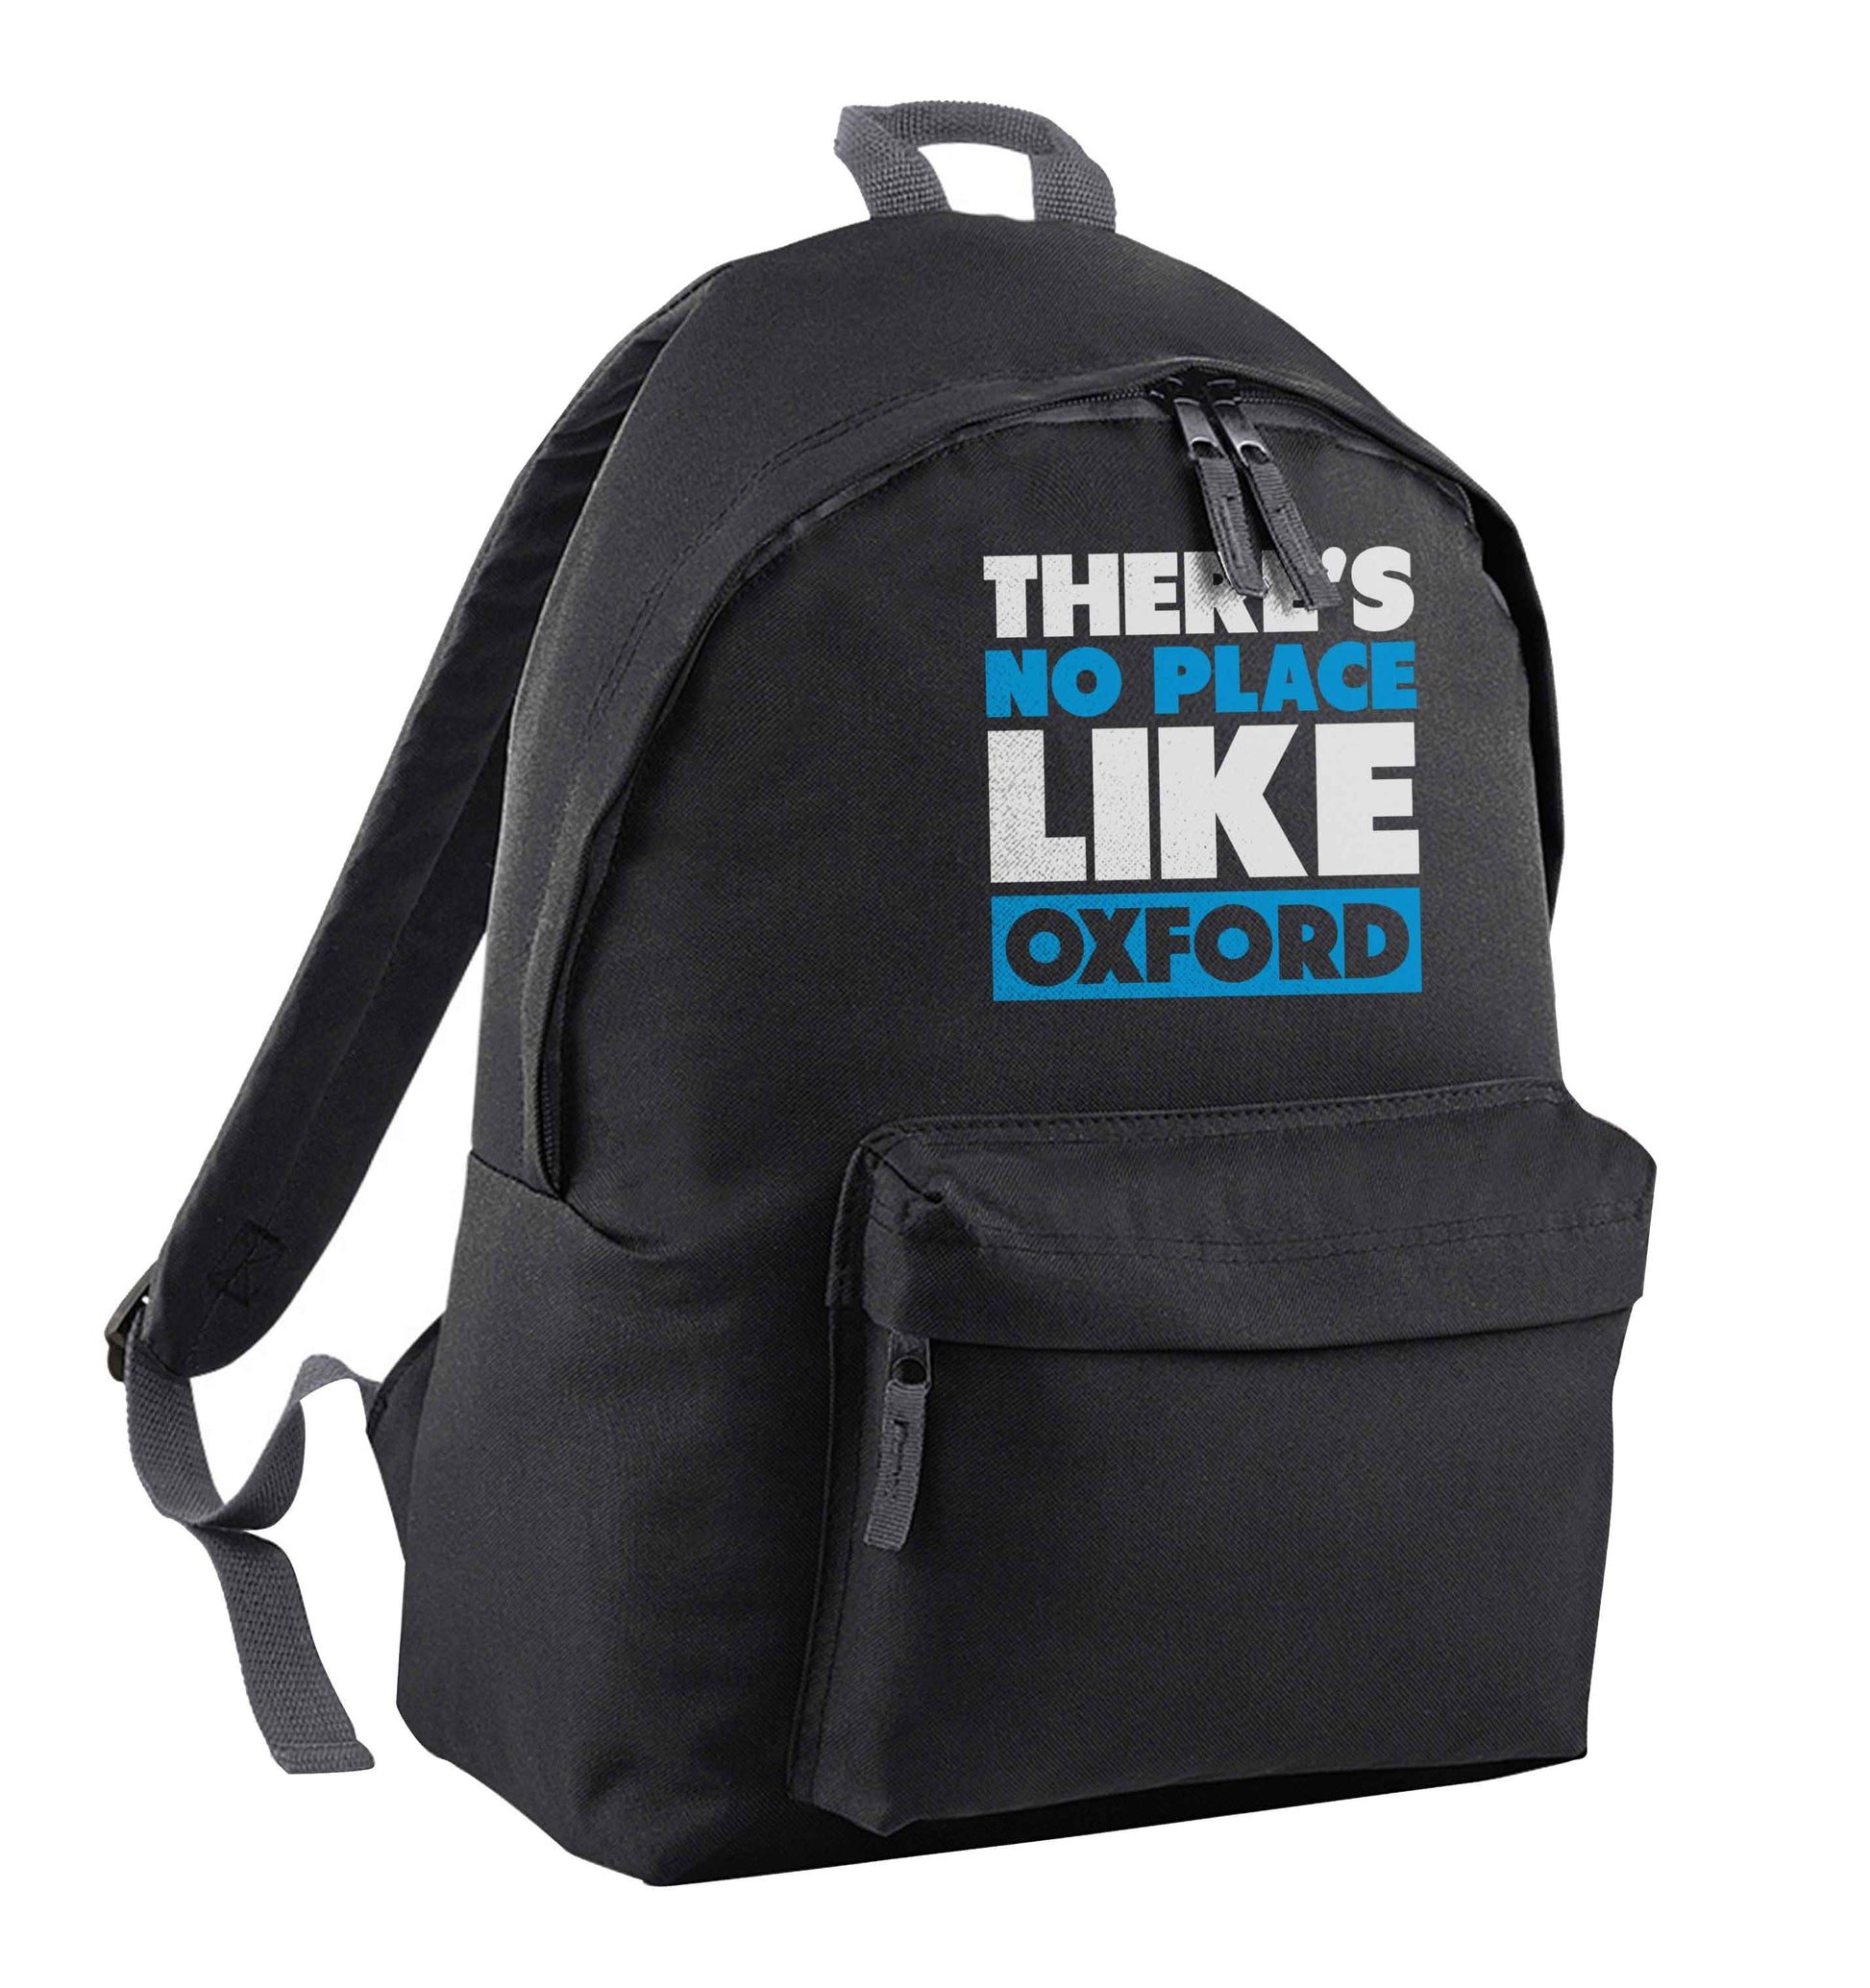 There's no place like Oxford black adults backpack